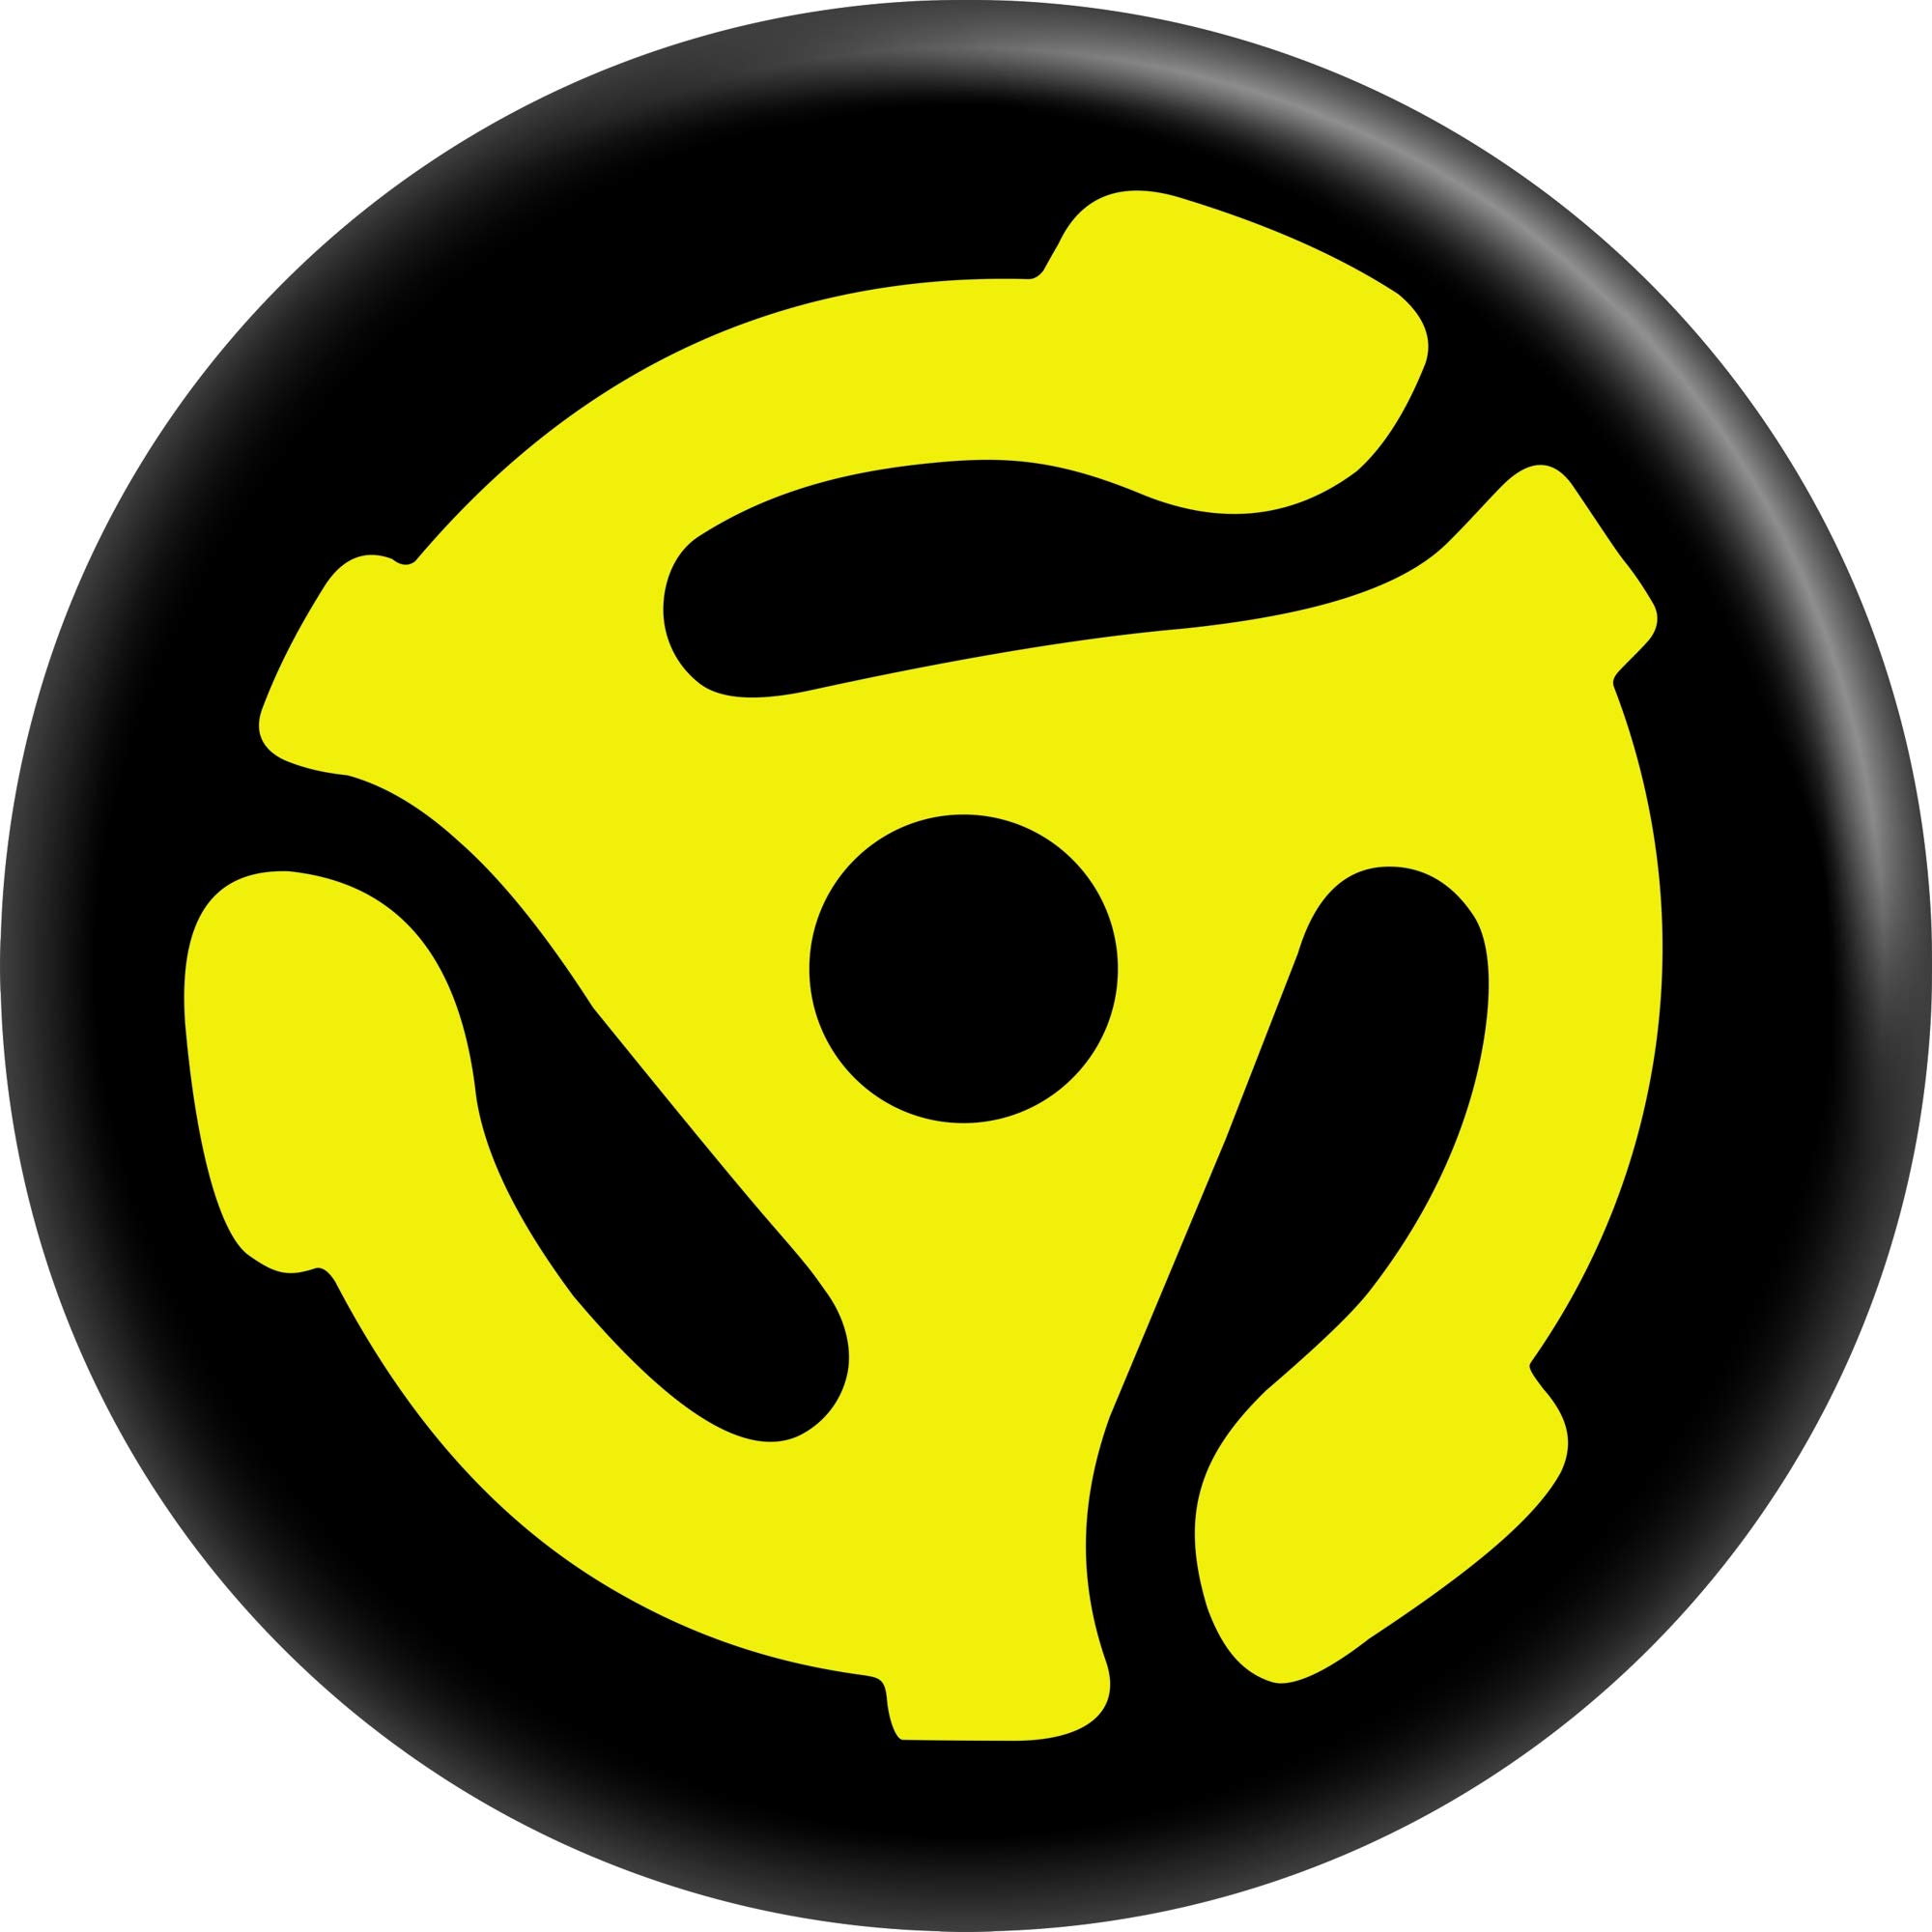 Square Deal Recordings & Supplies Yellow 45rpm Vinyl Record Adapter Logo - 2.25" Round Magnet